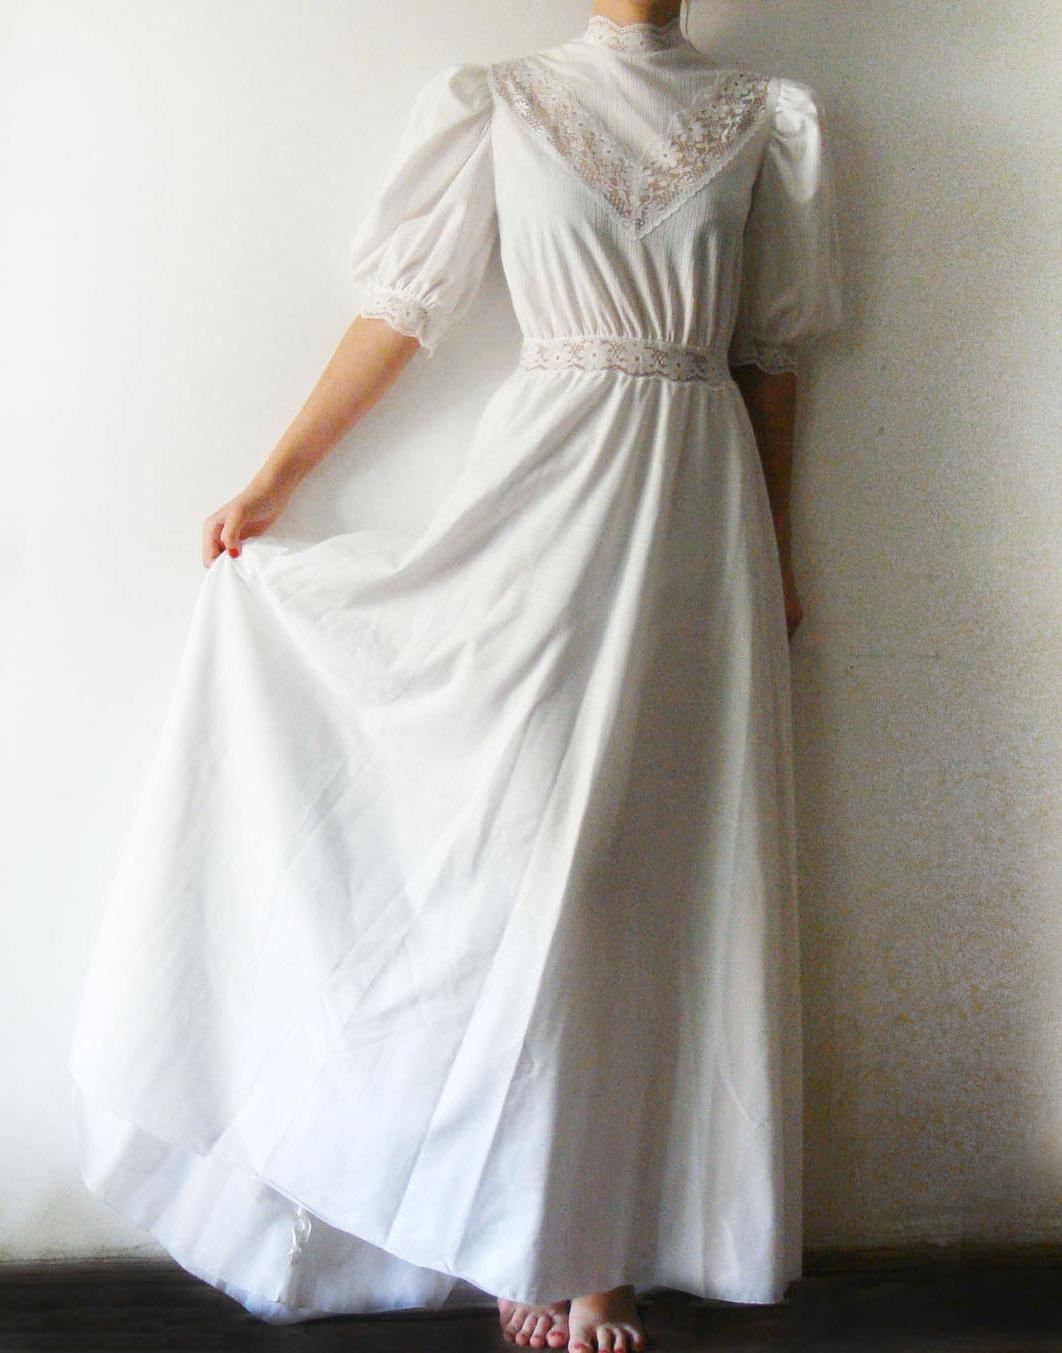 White Vintage Wedding Gown with Lace - 60s or 70s. From WhimsyTime